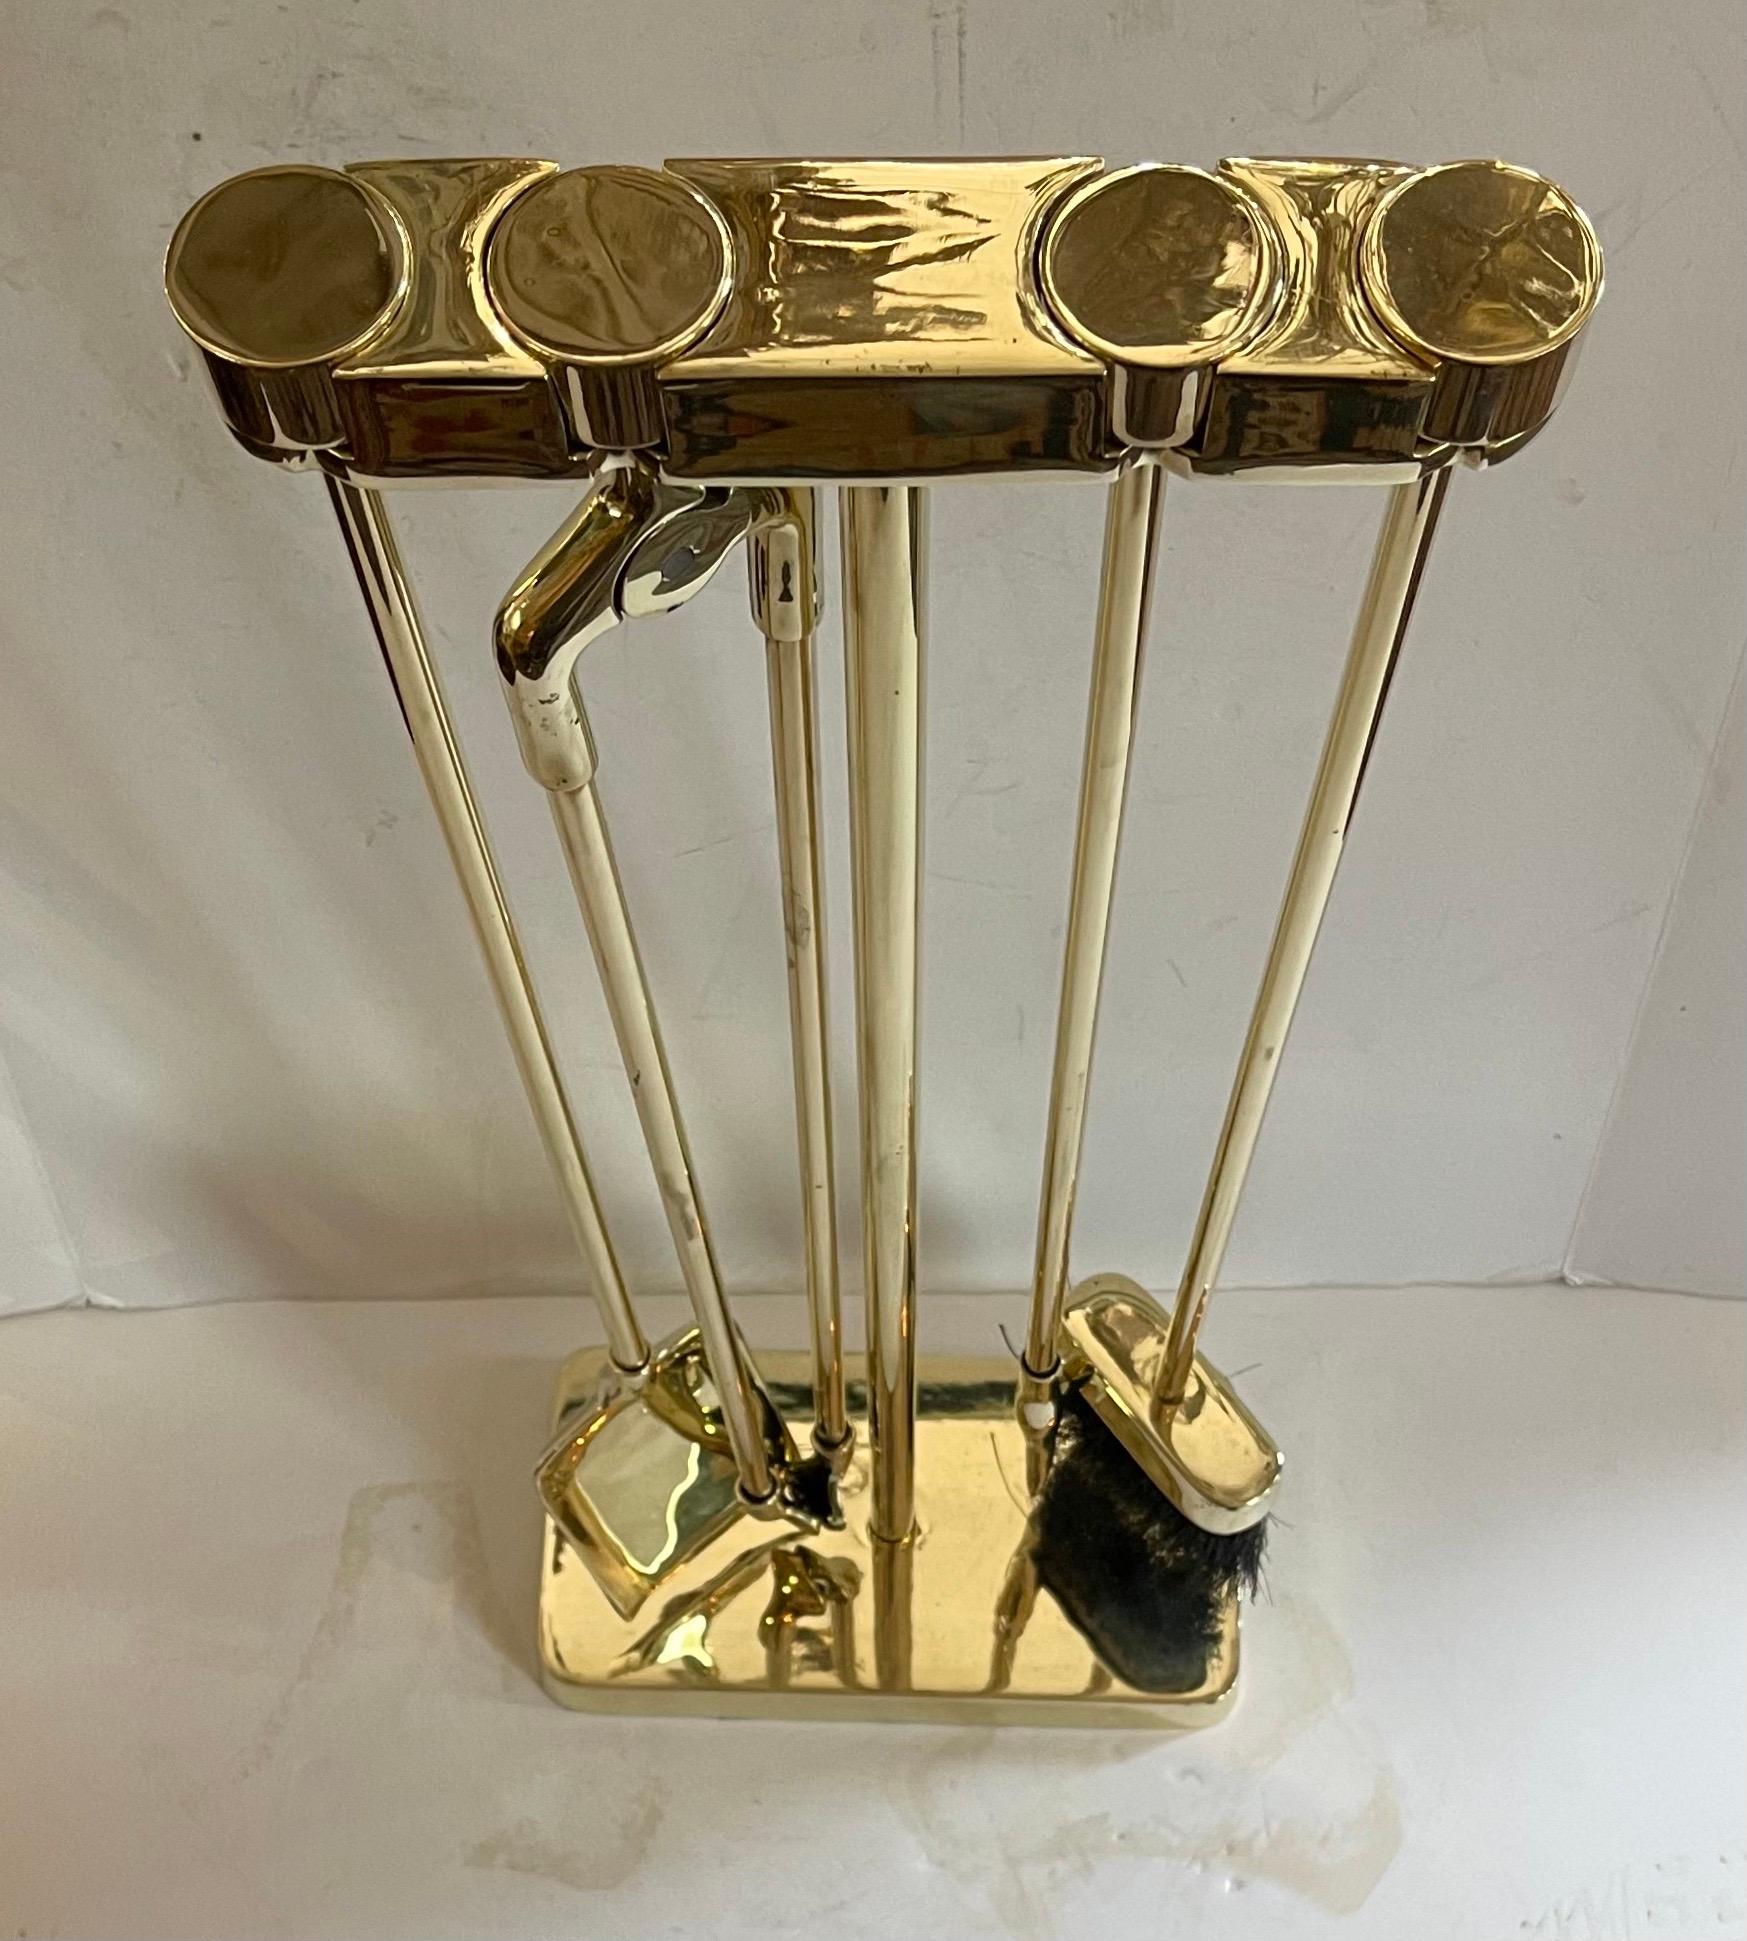 Wonderful Mid-Century Modern four piece polished brass fire place tool set consists of a stoker, shovel, brush and log holder, neatly suspended from a polished brass 